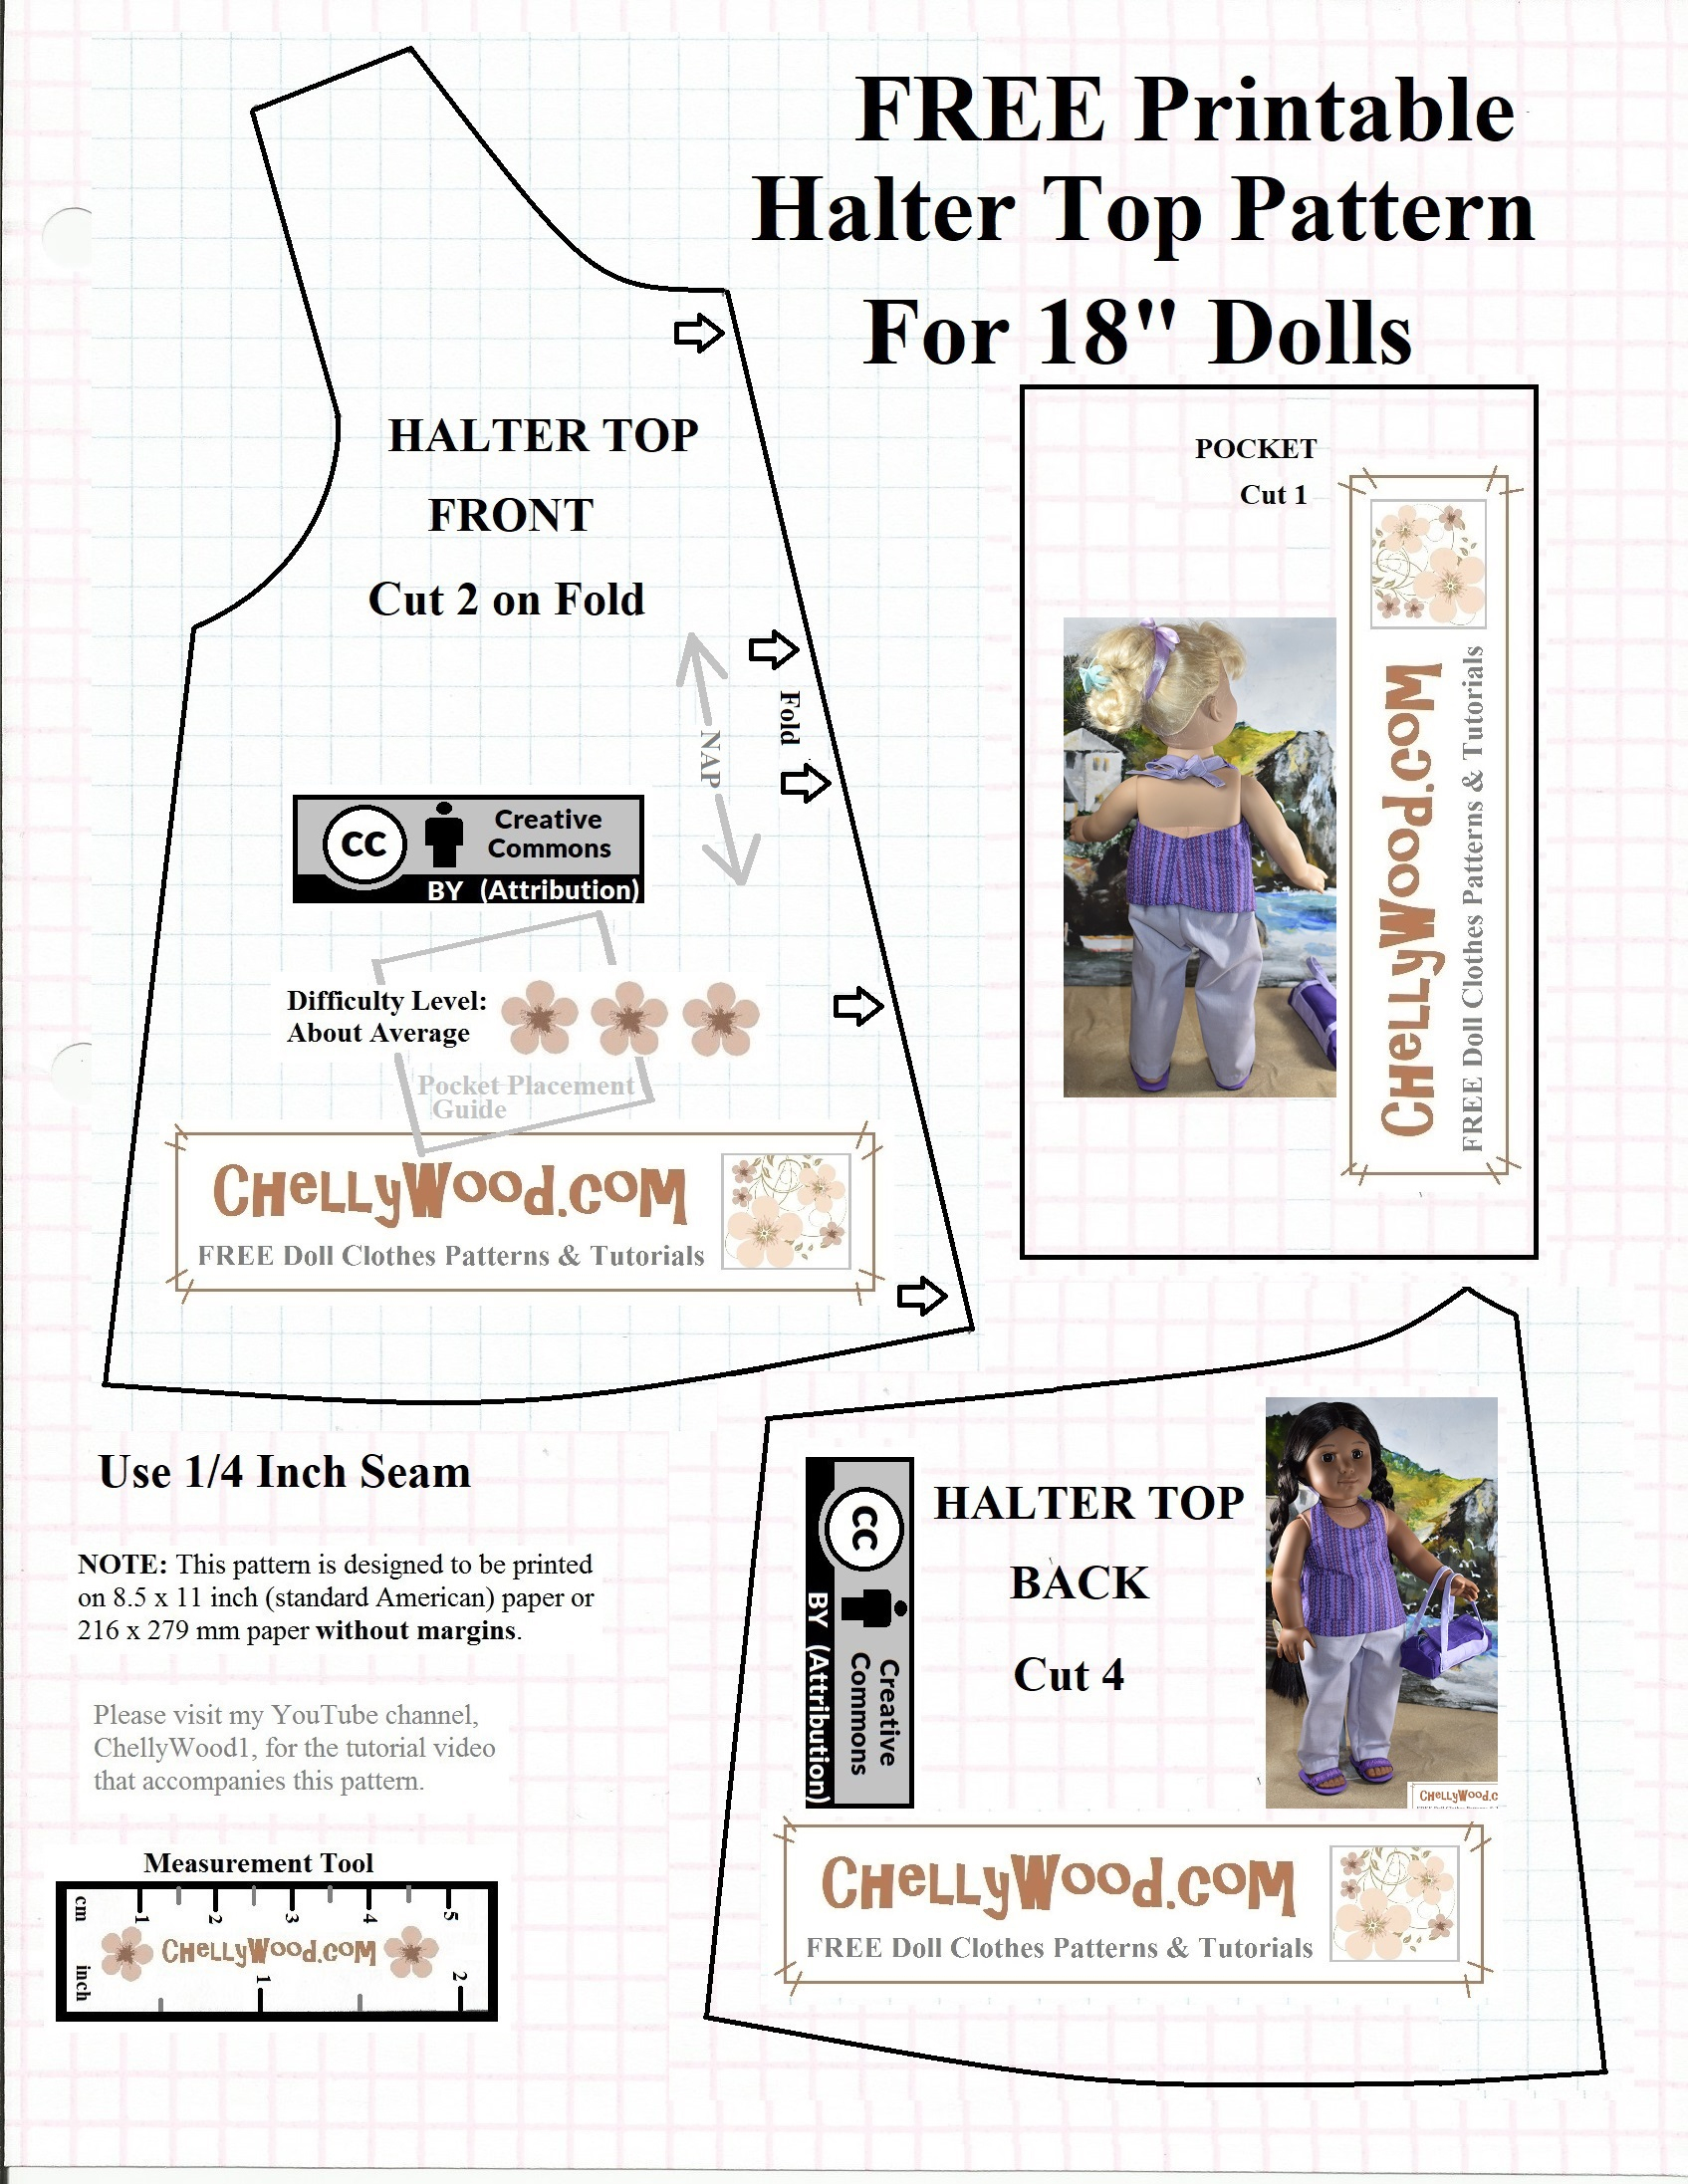 Free #agdoll Summer Shirt Pattern @ Chellywood #sewing 4#dolls - American Girl Doll Clothes Patterns Free Printable